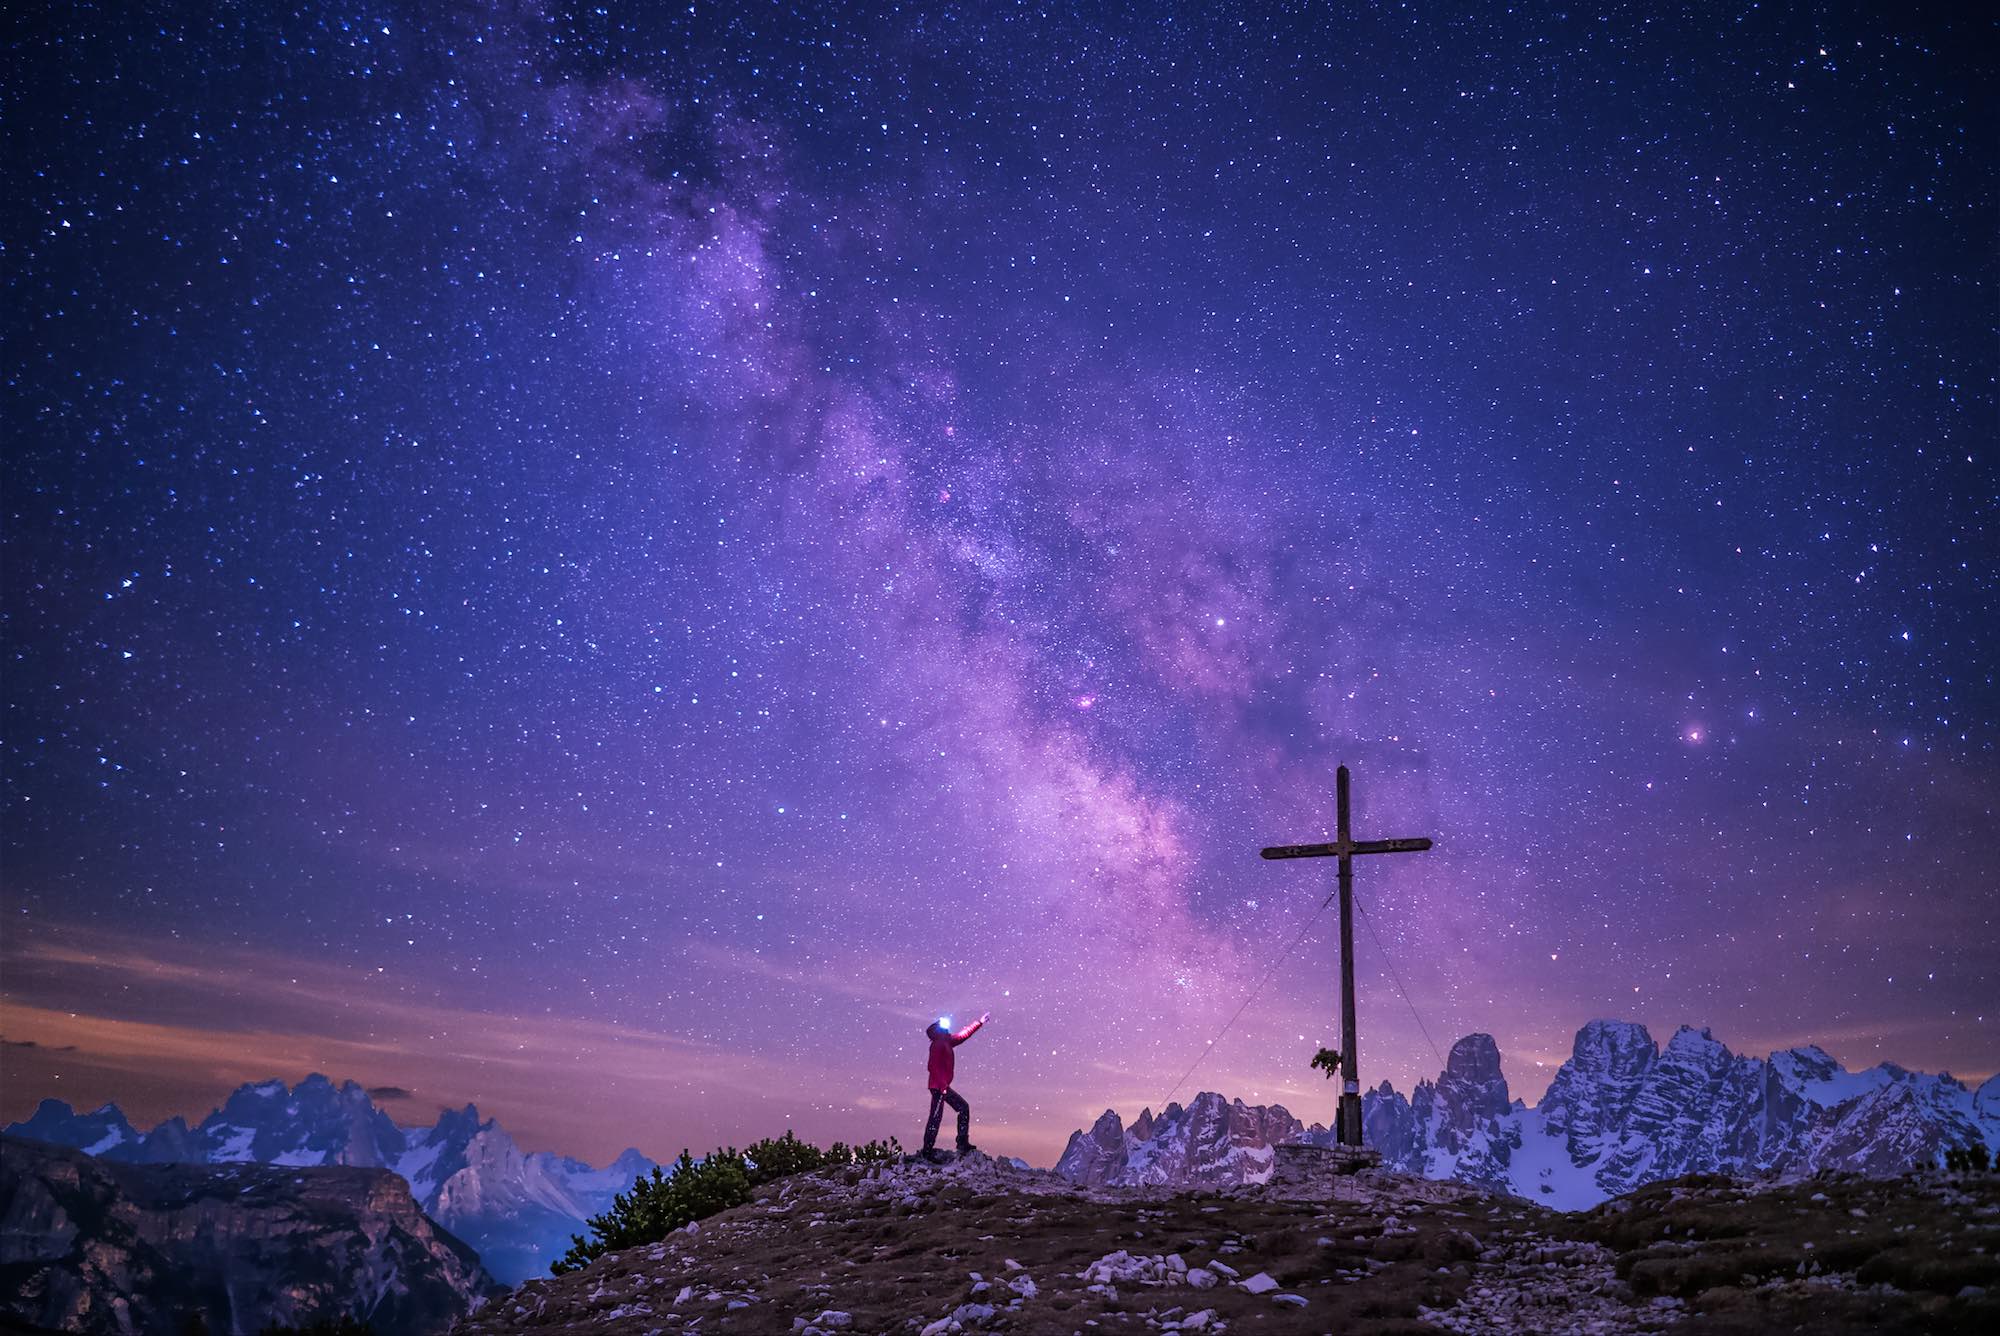 CHASING THE MILKY WAY IN THE DOLOMITES